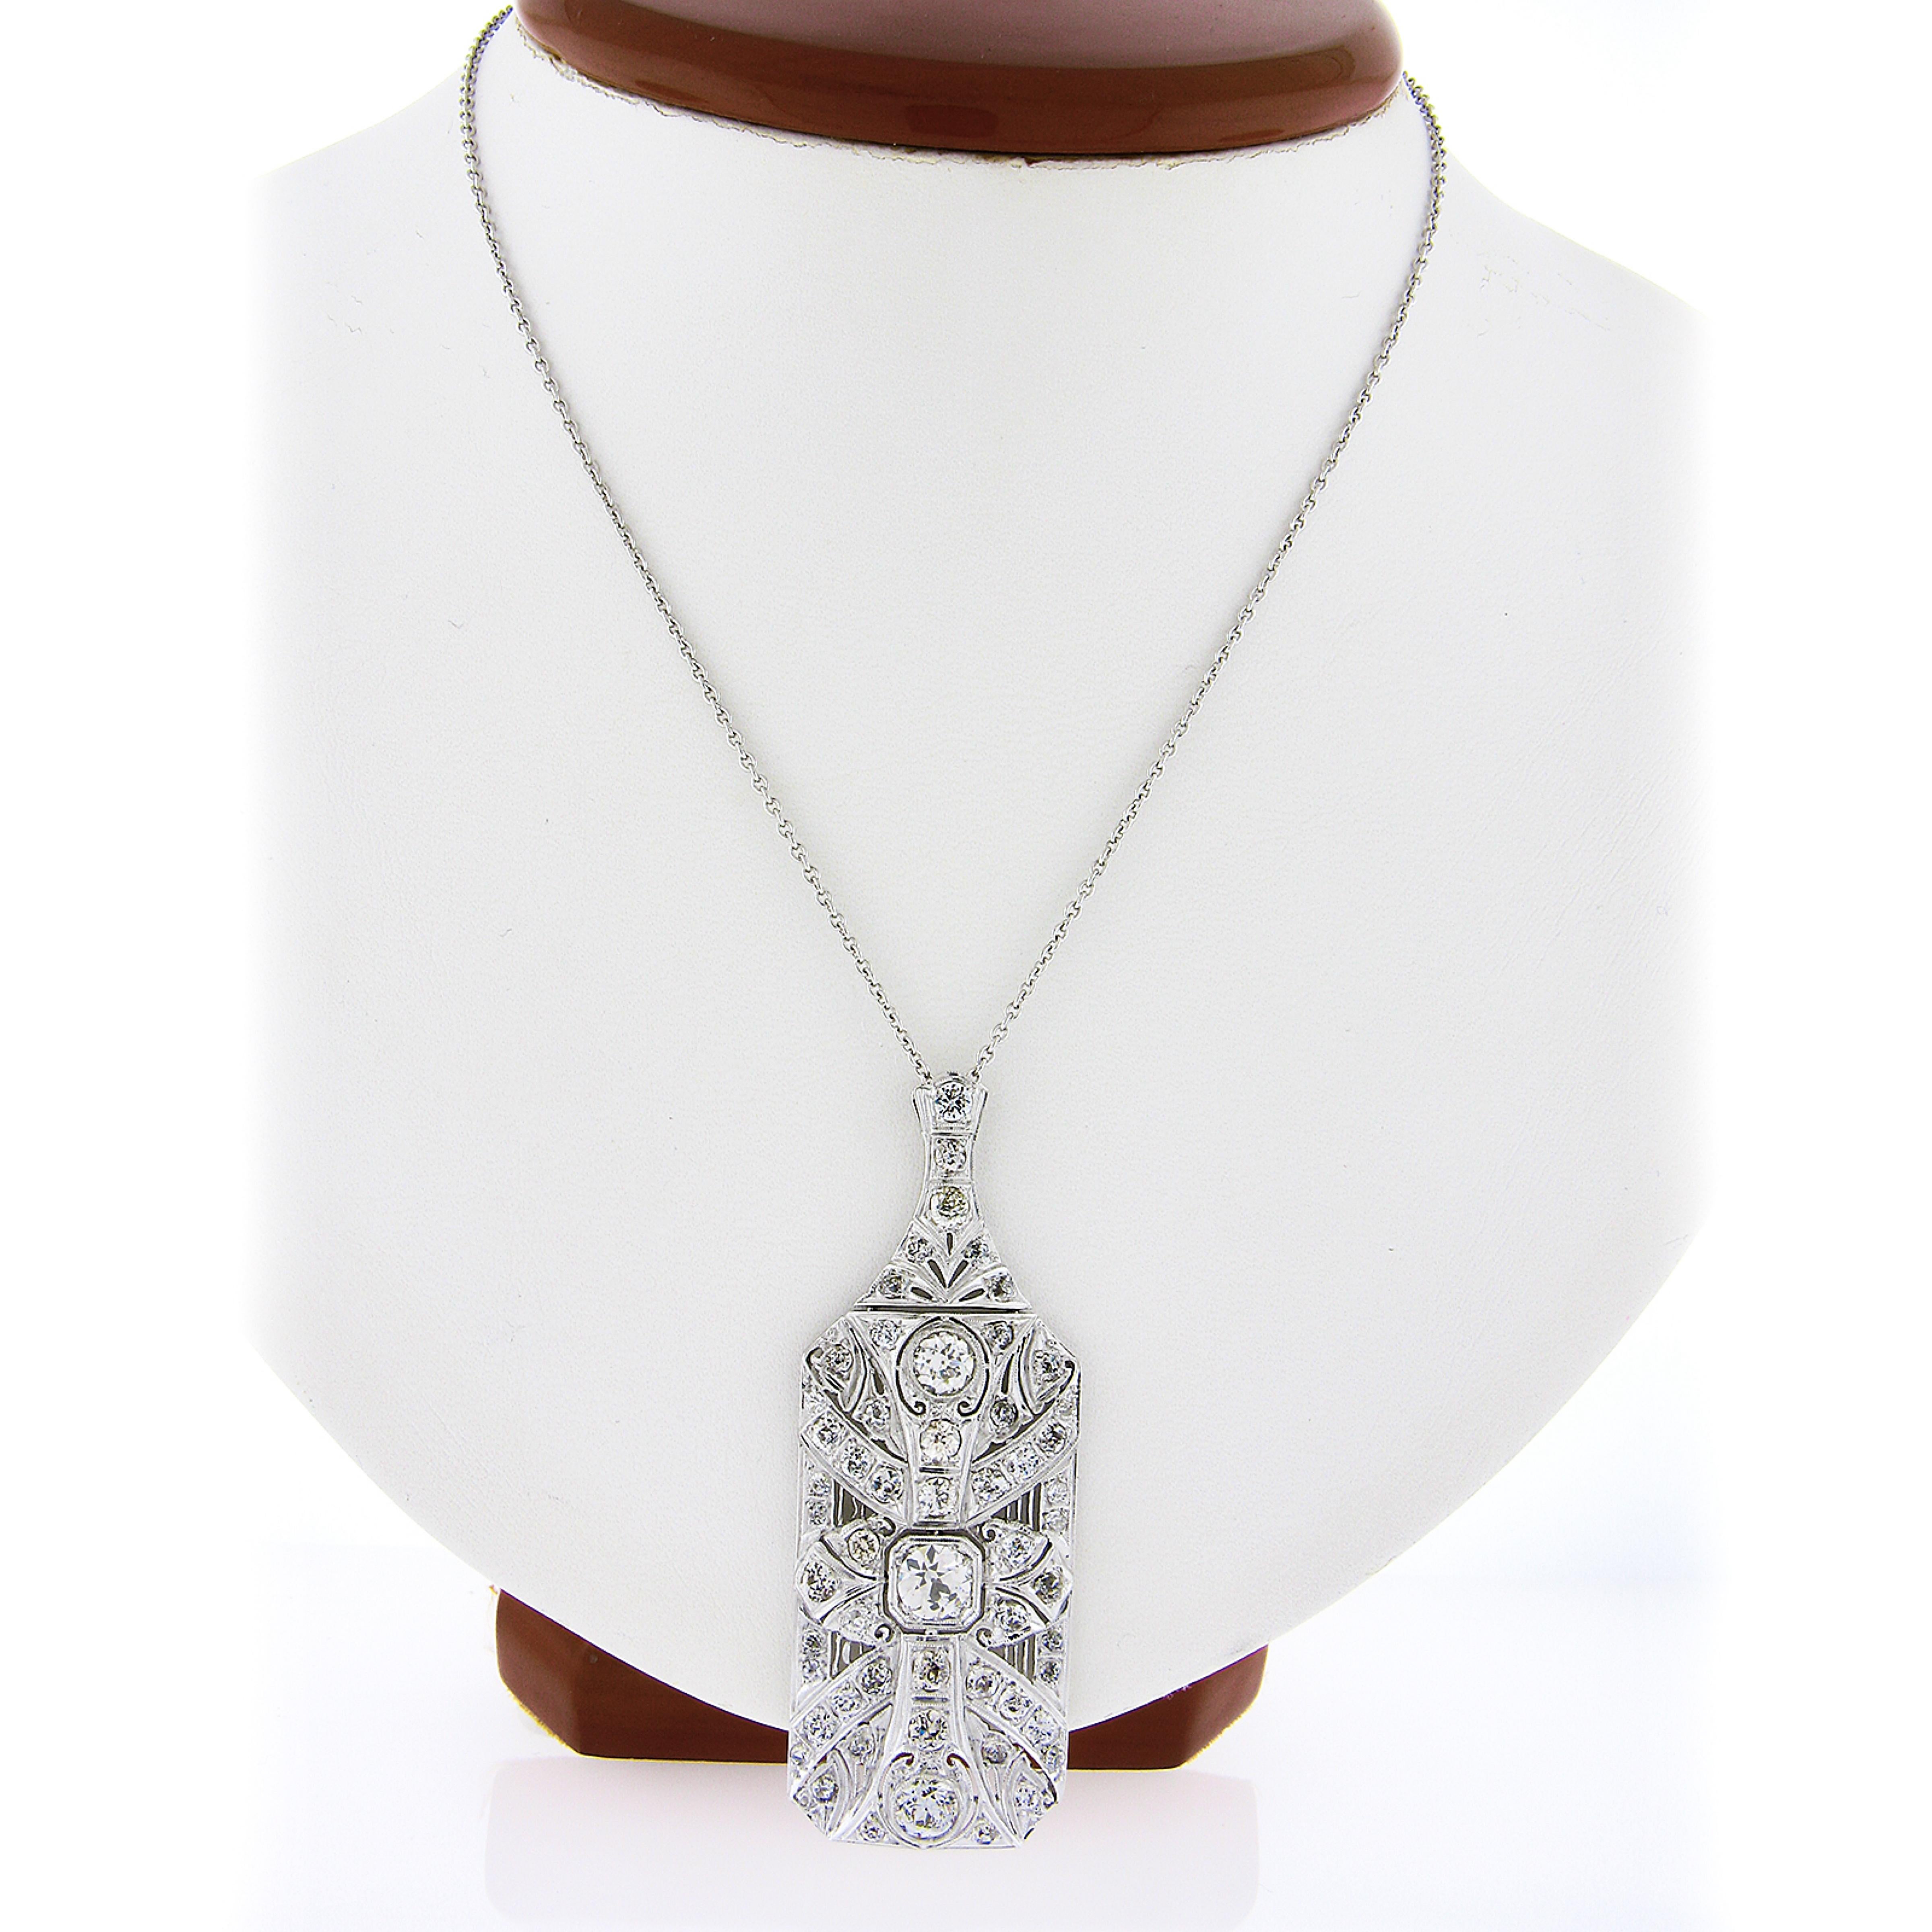 Here we have an absolutely breathtaking antique diamond statement pendant crafted in solid platinum during the art deco period. This elegant and large piece is completely drenched with very fine quality old European cut diamonds throughout that